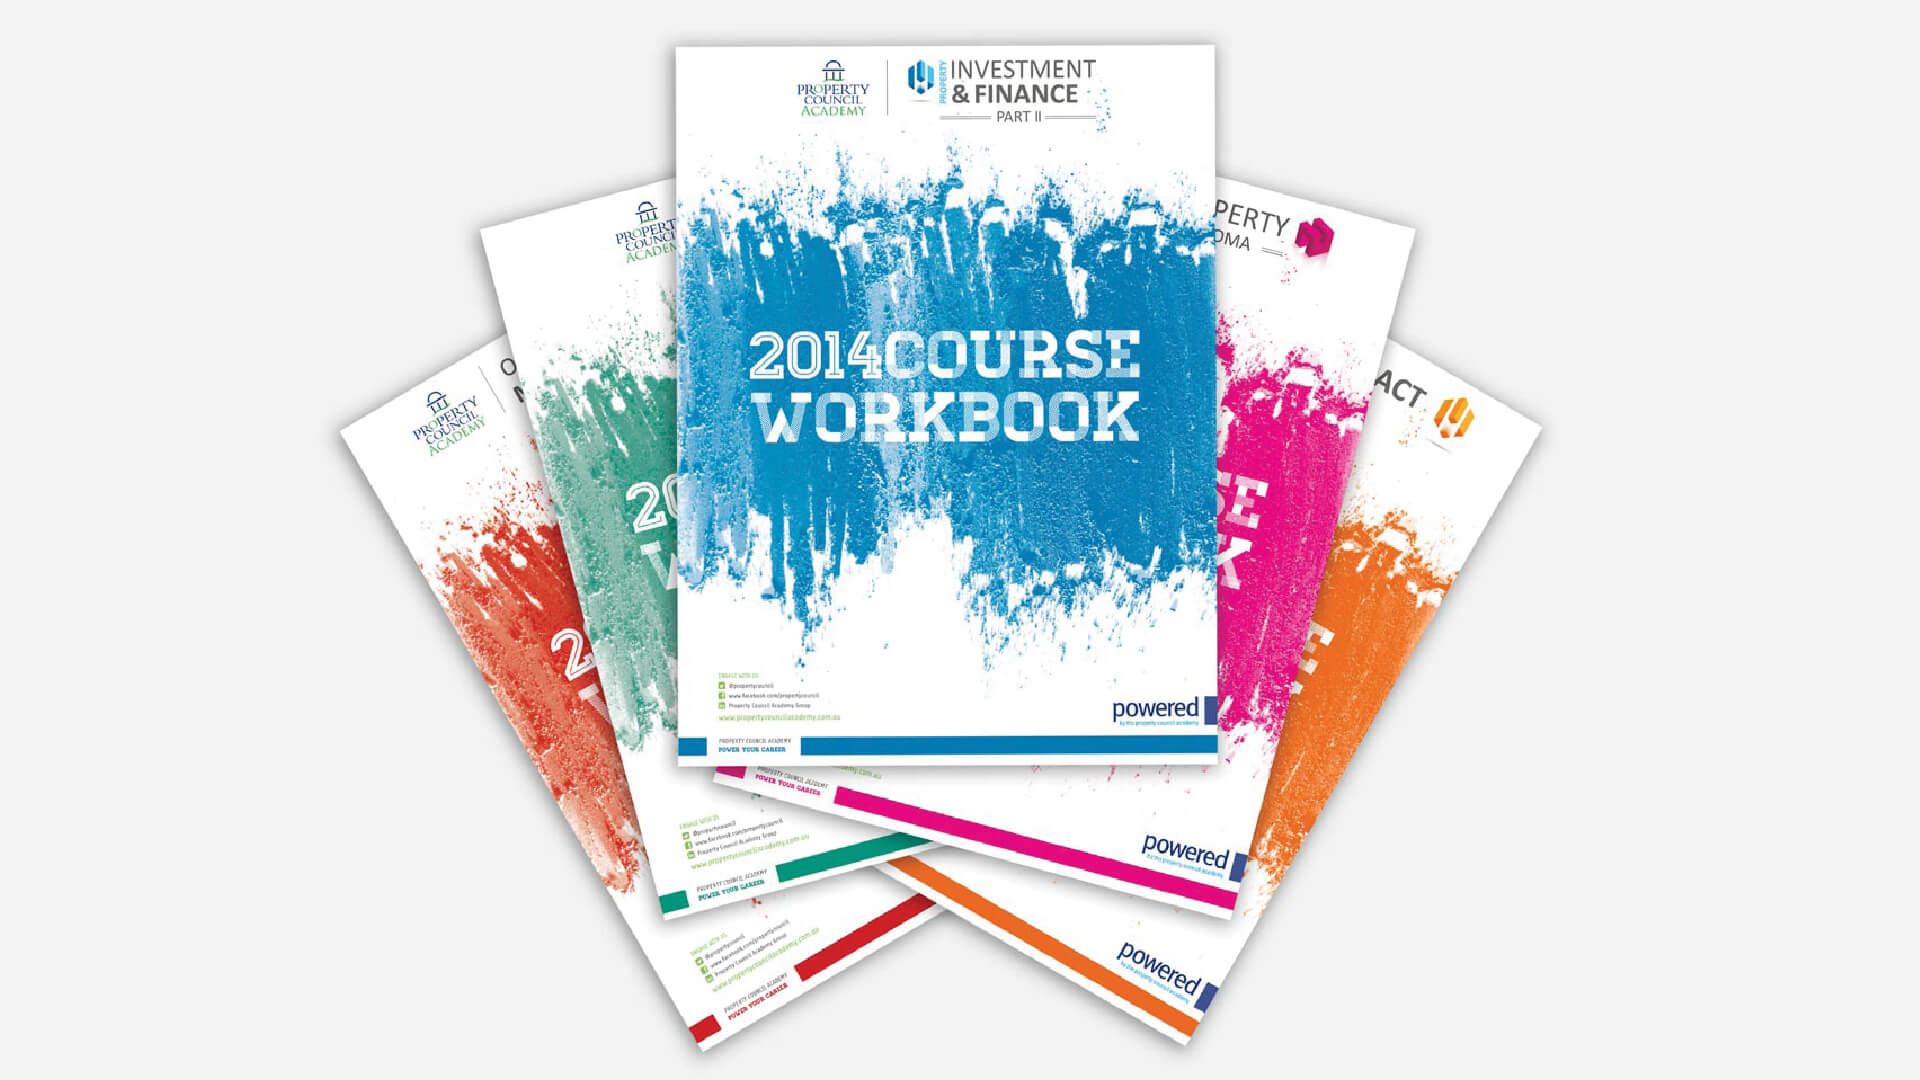 Property Council Academy 2014 Courses Collateral course workbook